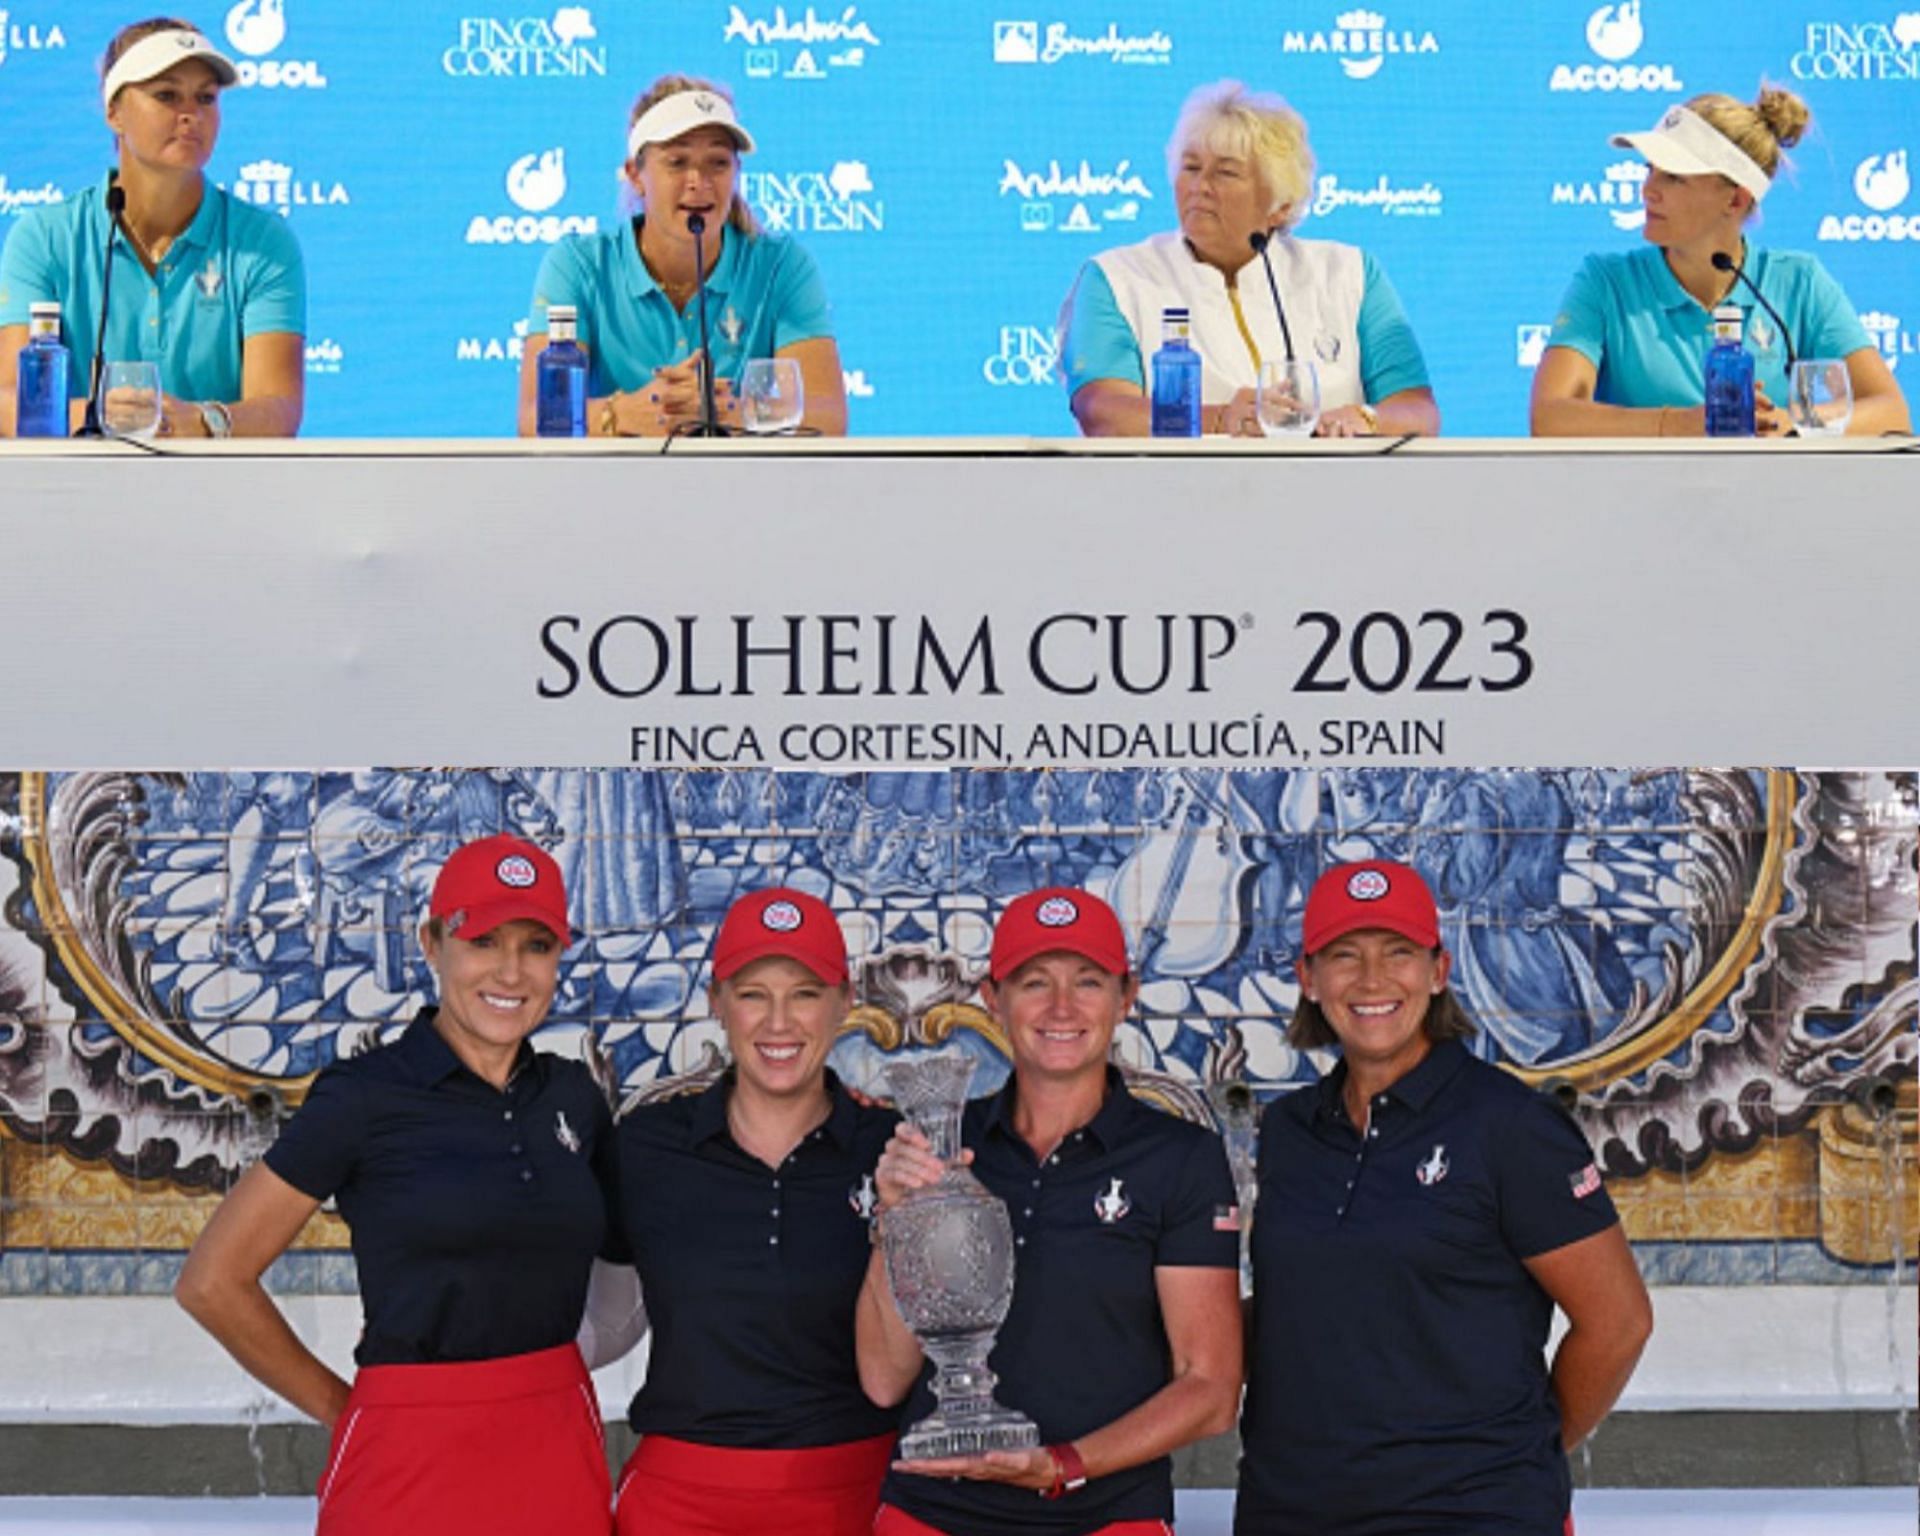 Captains and vice-captains of the European (above) and American (below) teams for the 2023 Solheim Cup (Image via Getty).